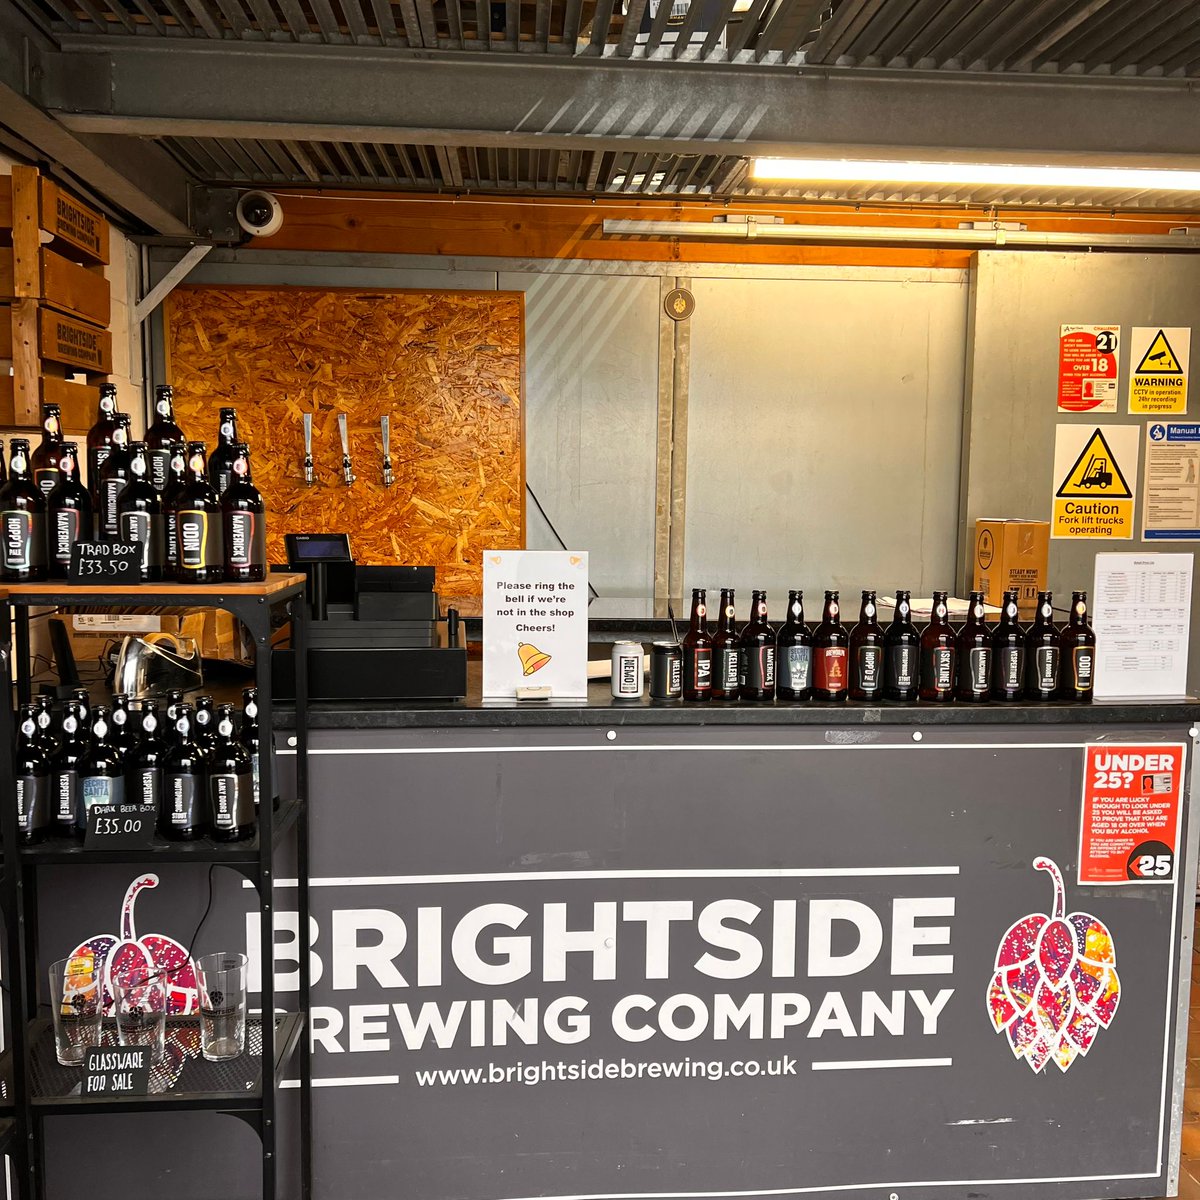 👋 Hey there folks! Just a quick one to let you know our Saturday brewery shop hours are changing from 06/04. 🕒 You'll be able to pop in to pick your beers up on Saturday's going forward from 09:30 - 15:30